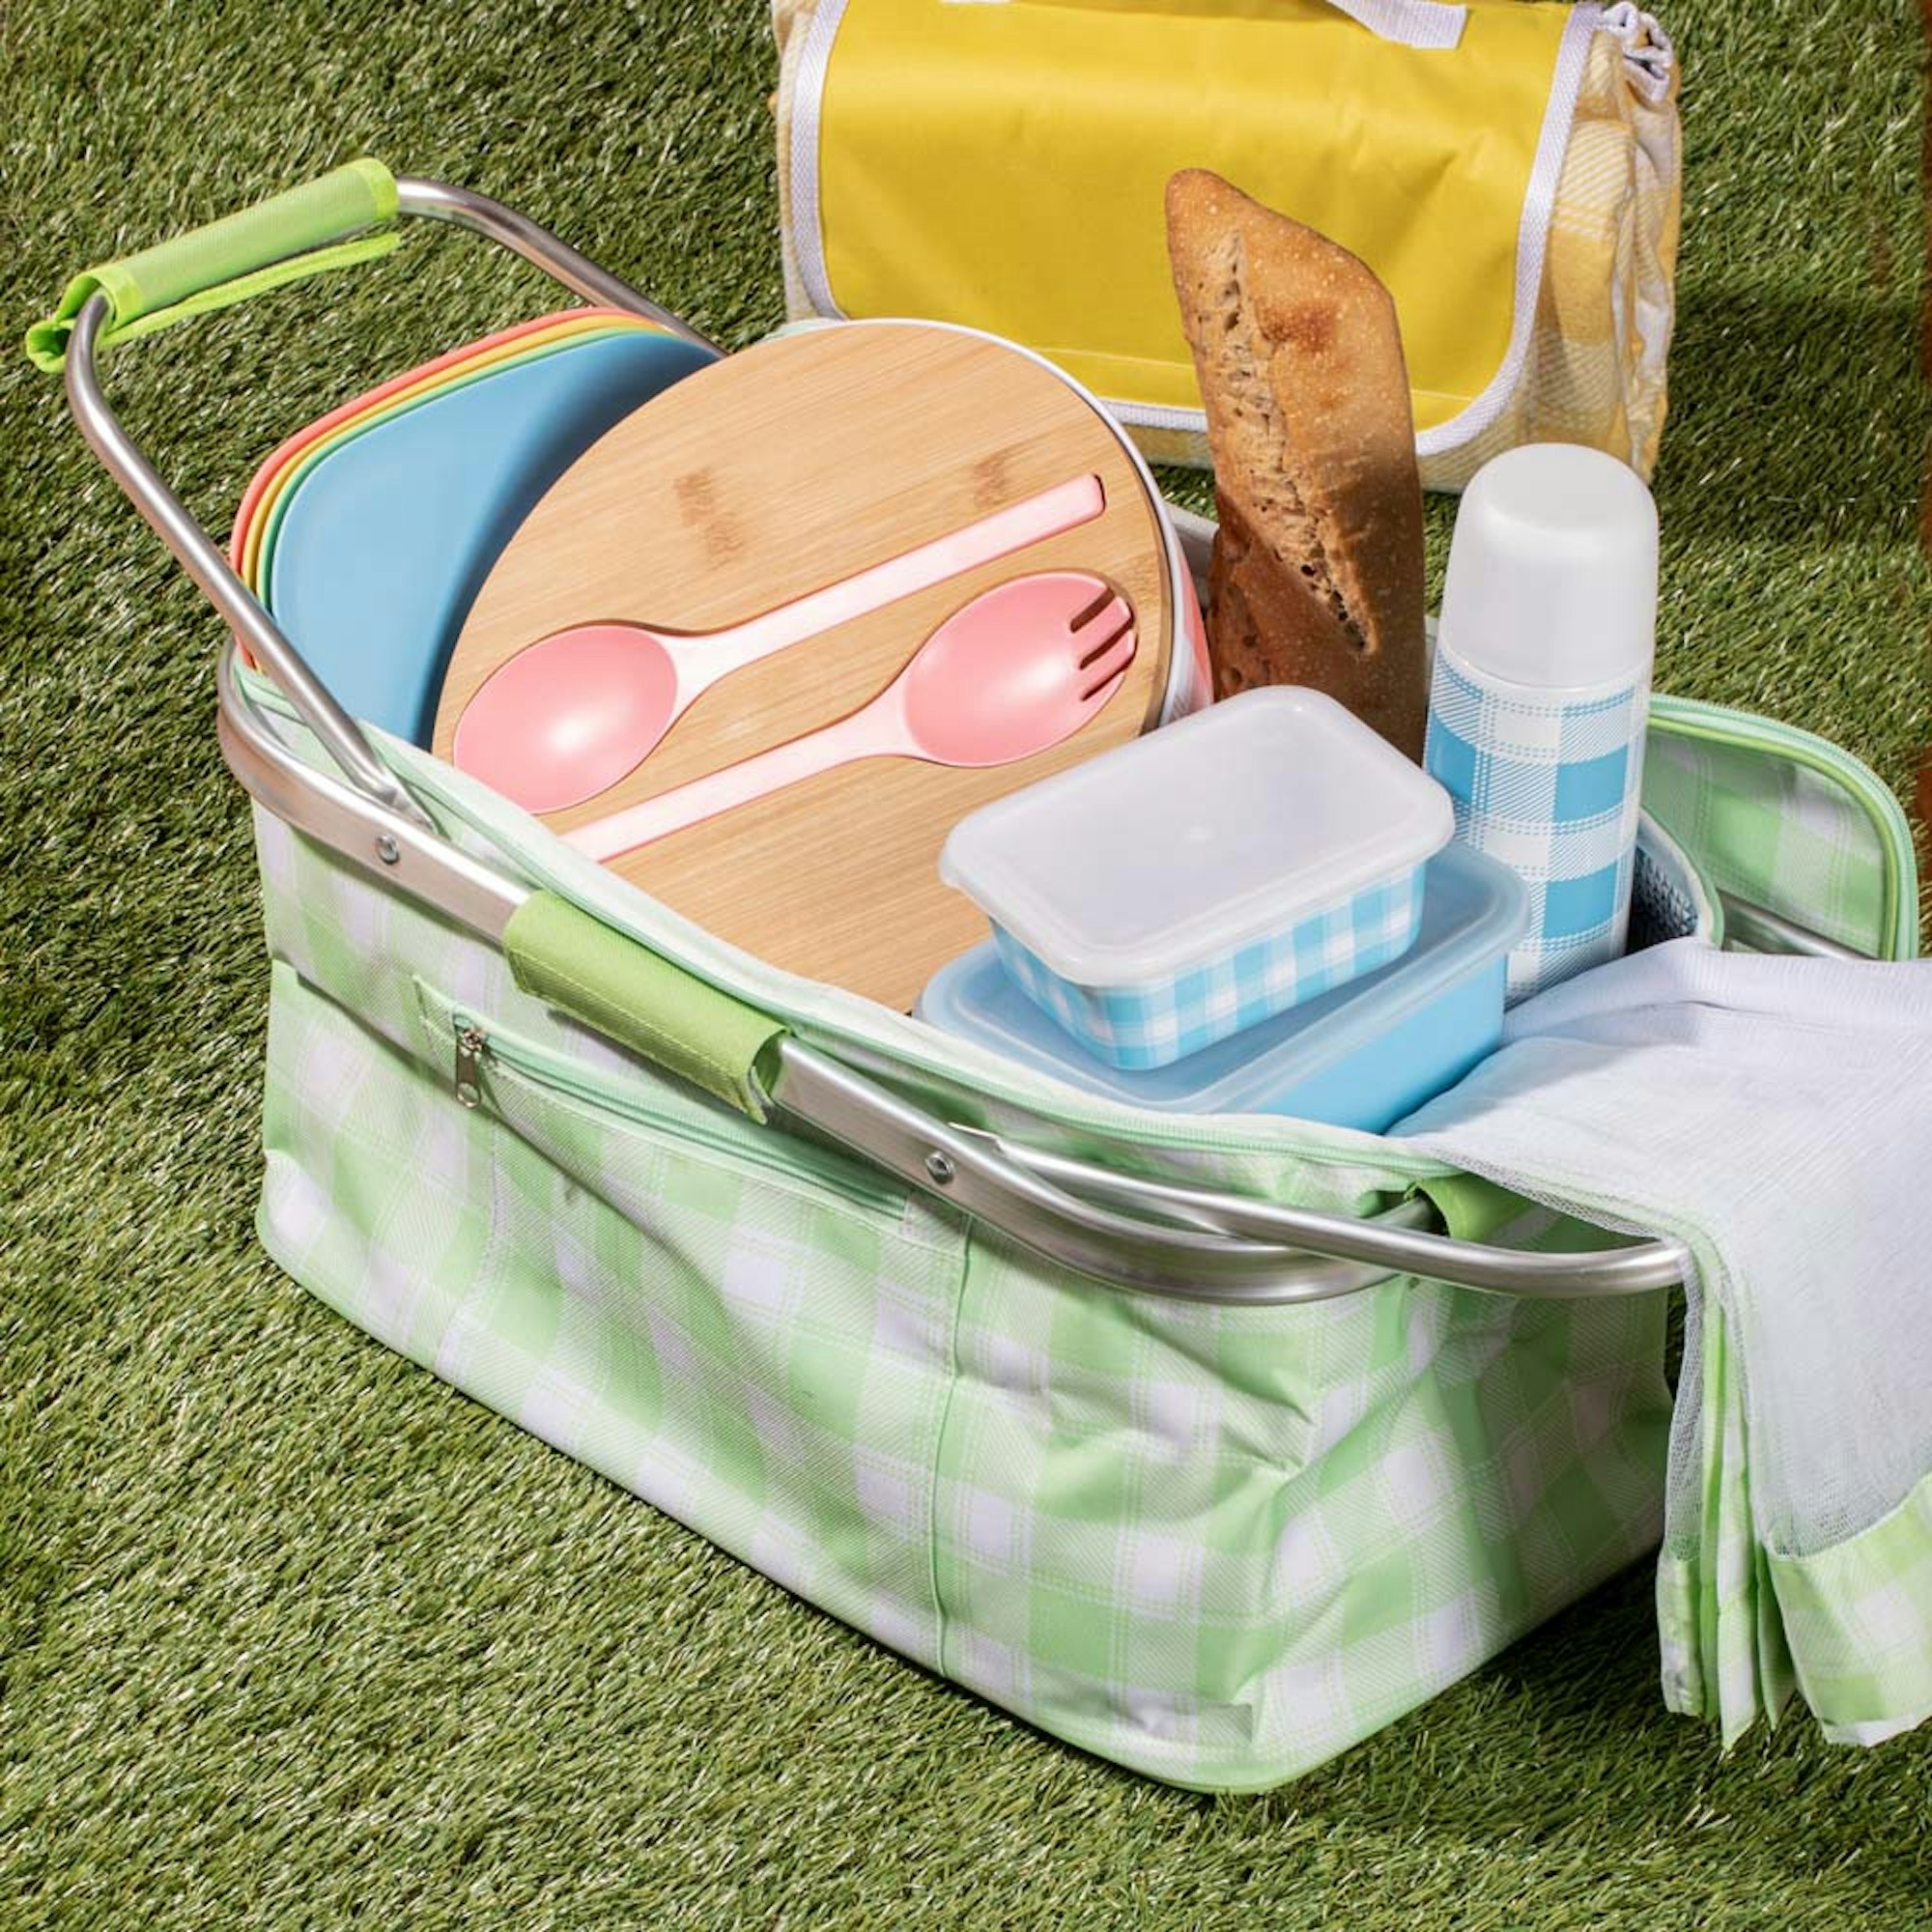 Green and white picnic basket with picnicware